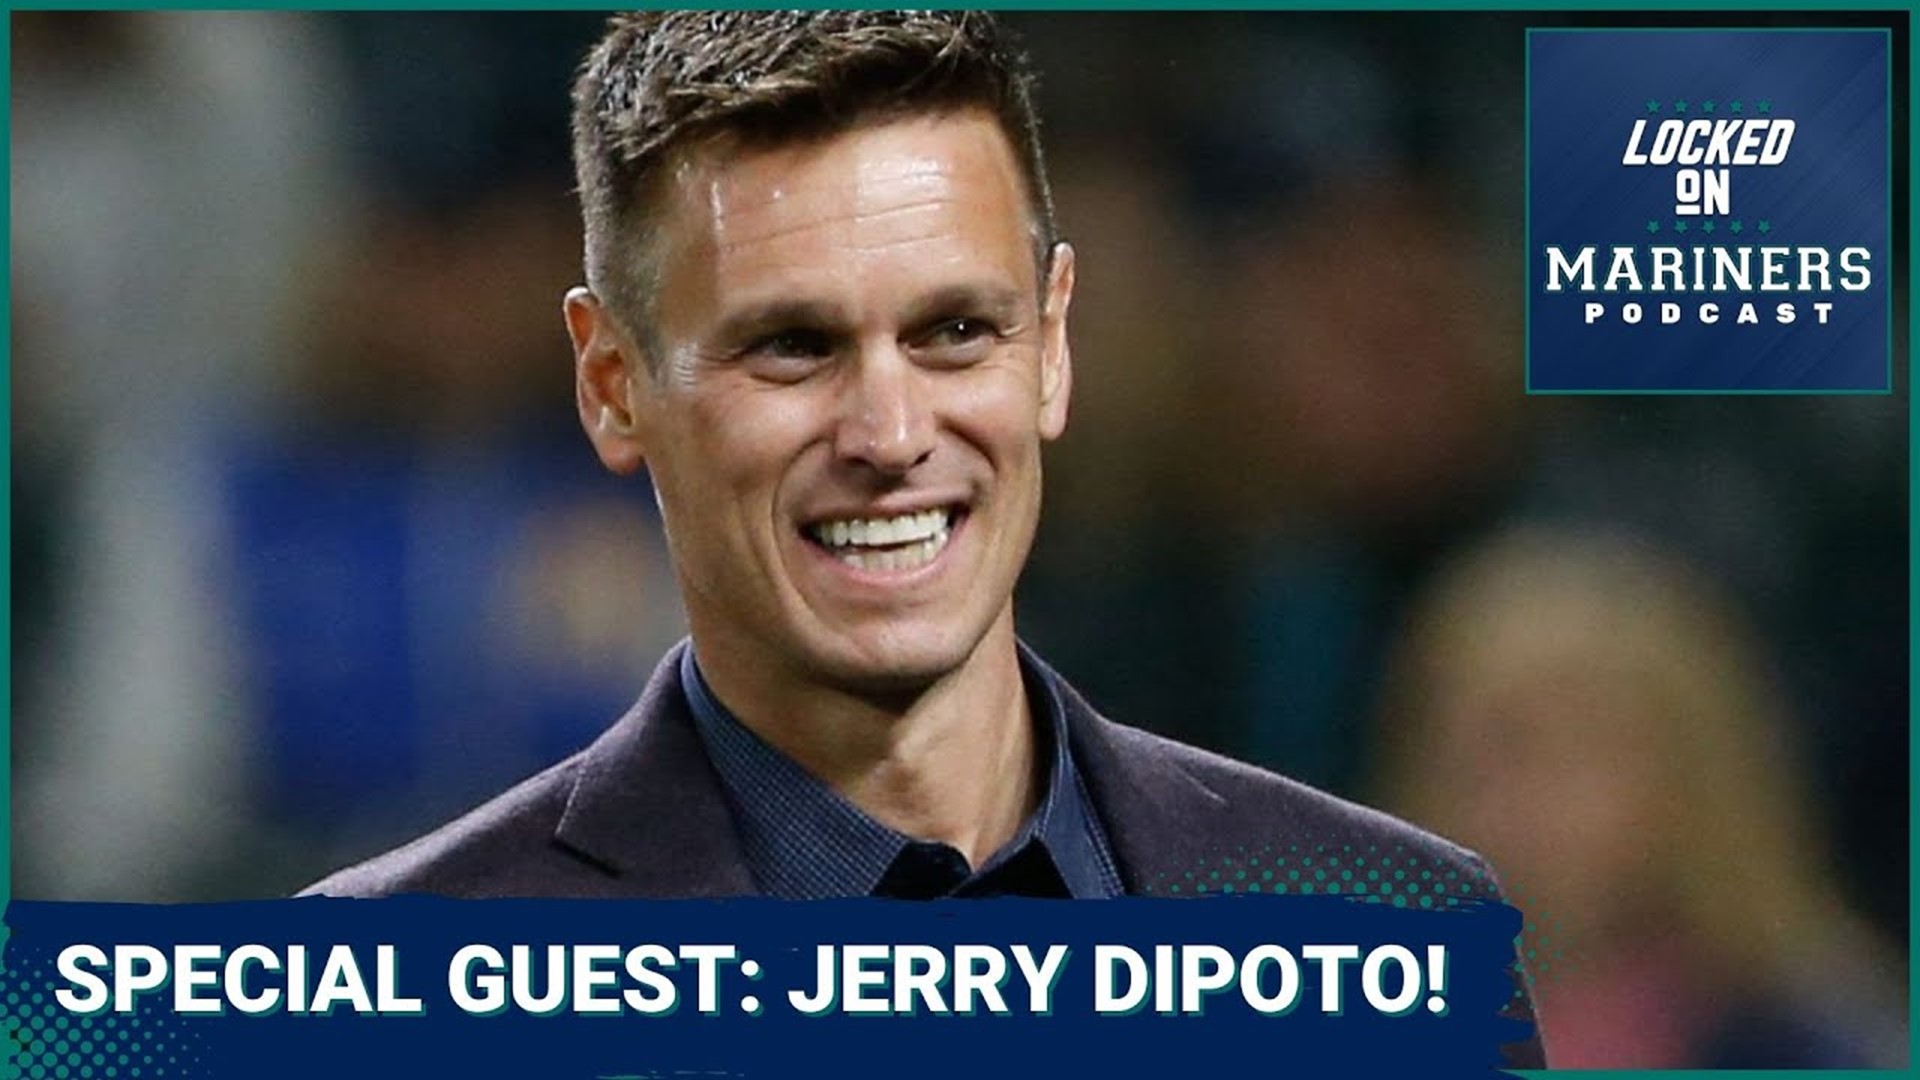 Mariners president of baseball operations Jerry Dipoto joins hosts Ty Dane Gonzalez and Colby Patnode for a nearly hour-long discussion.